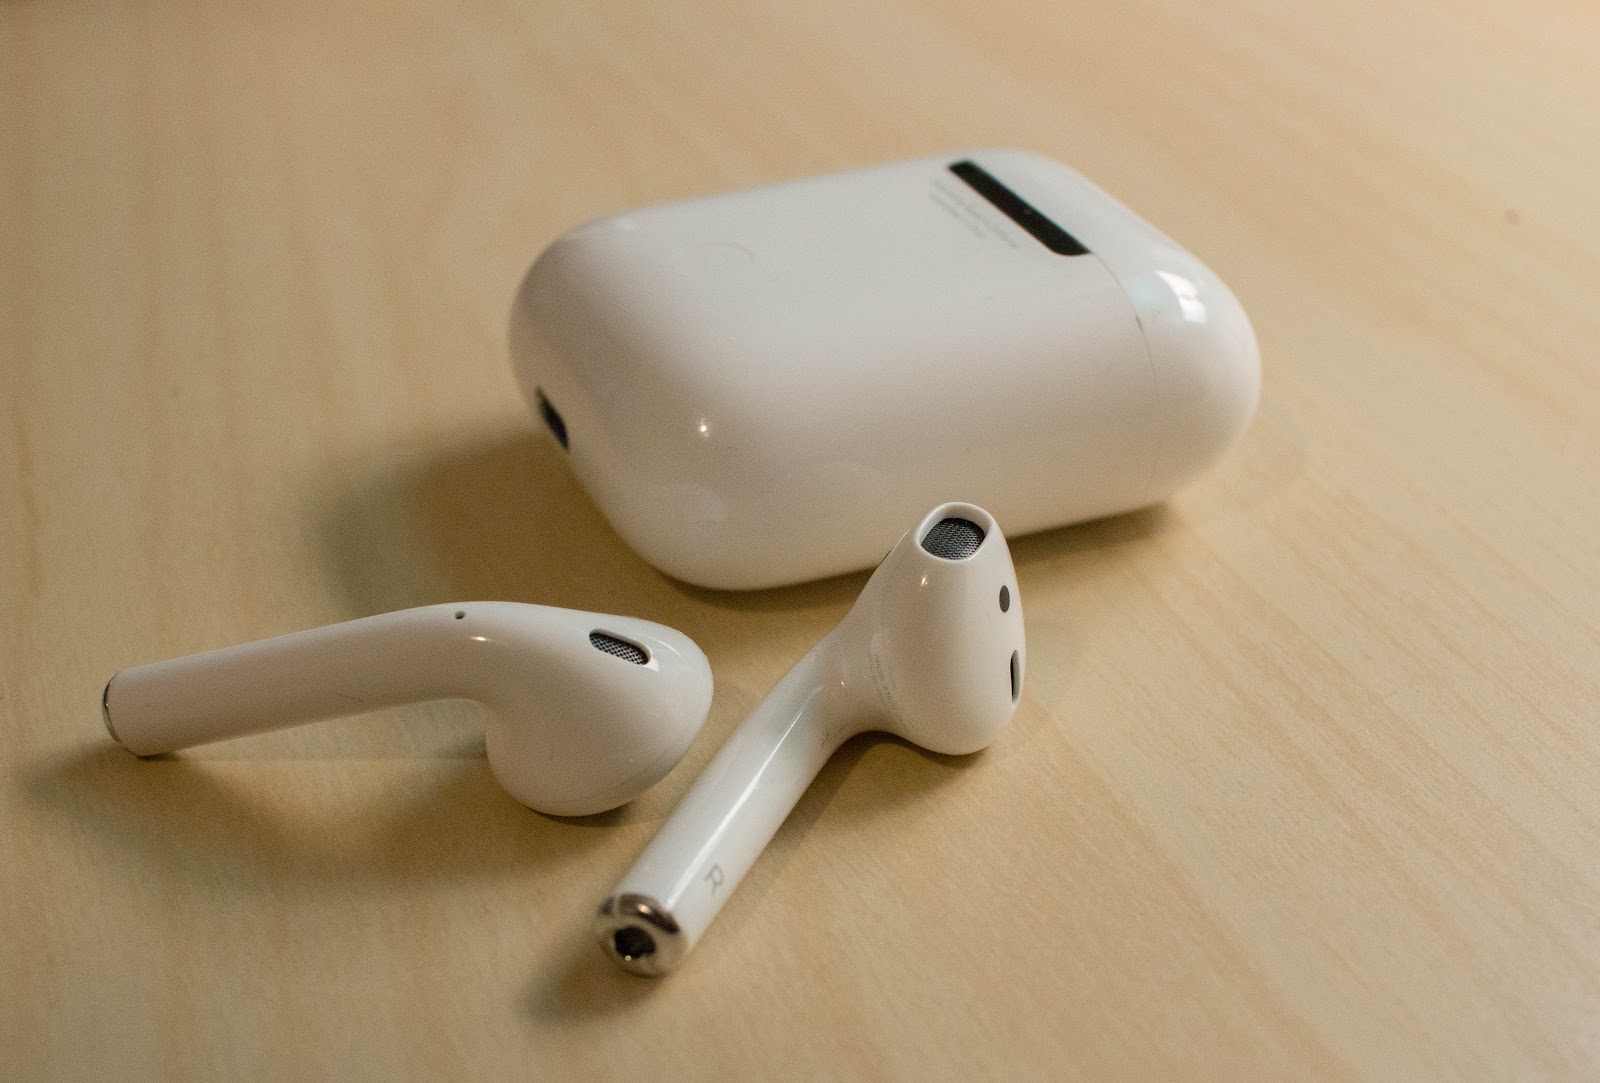 This image shows the Apple AirPods 3rd Generation on the table.